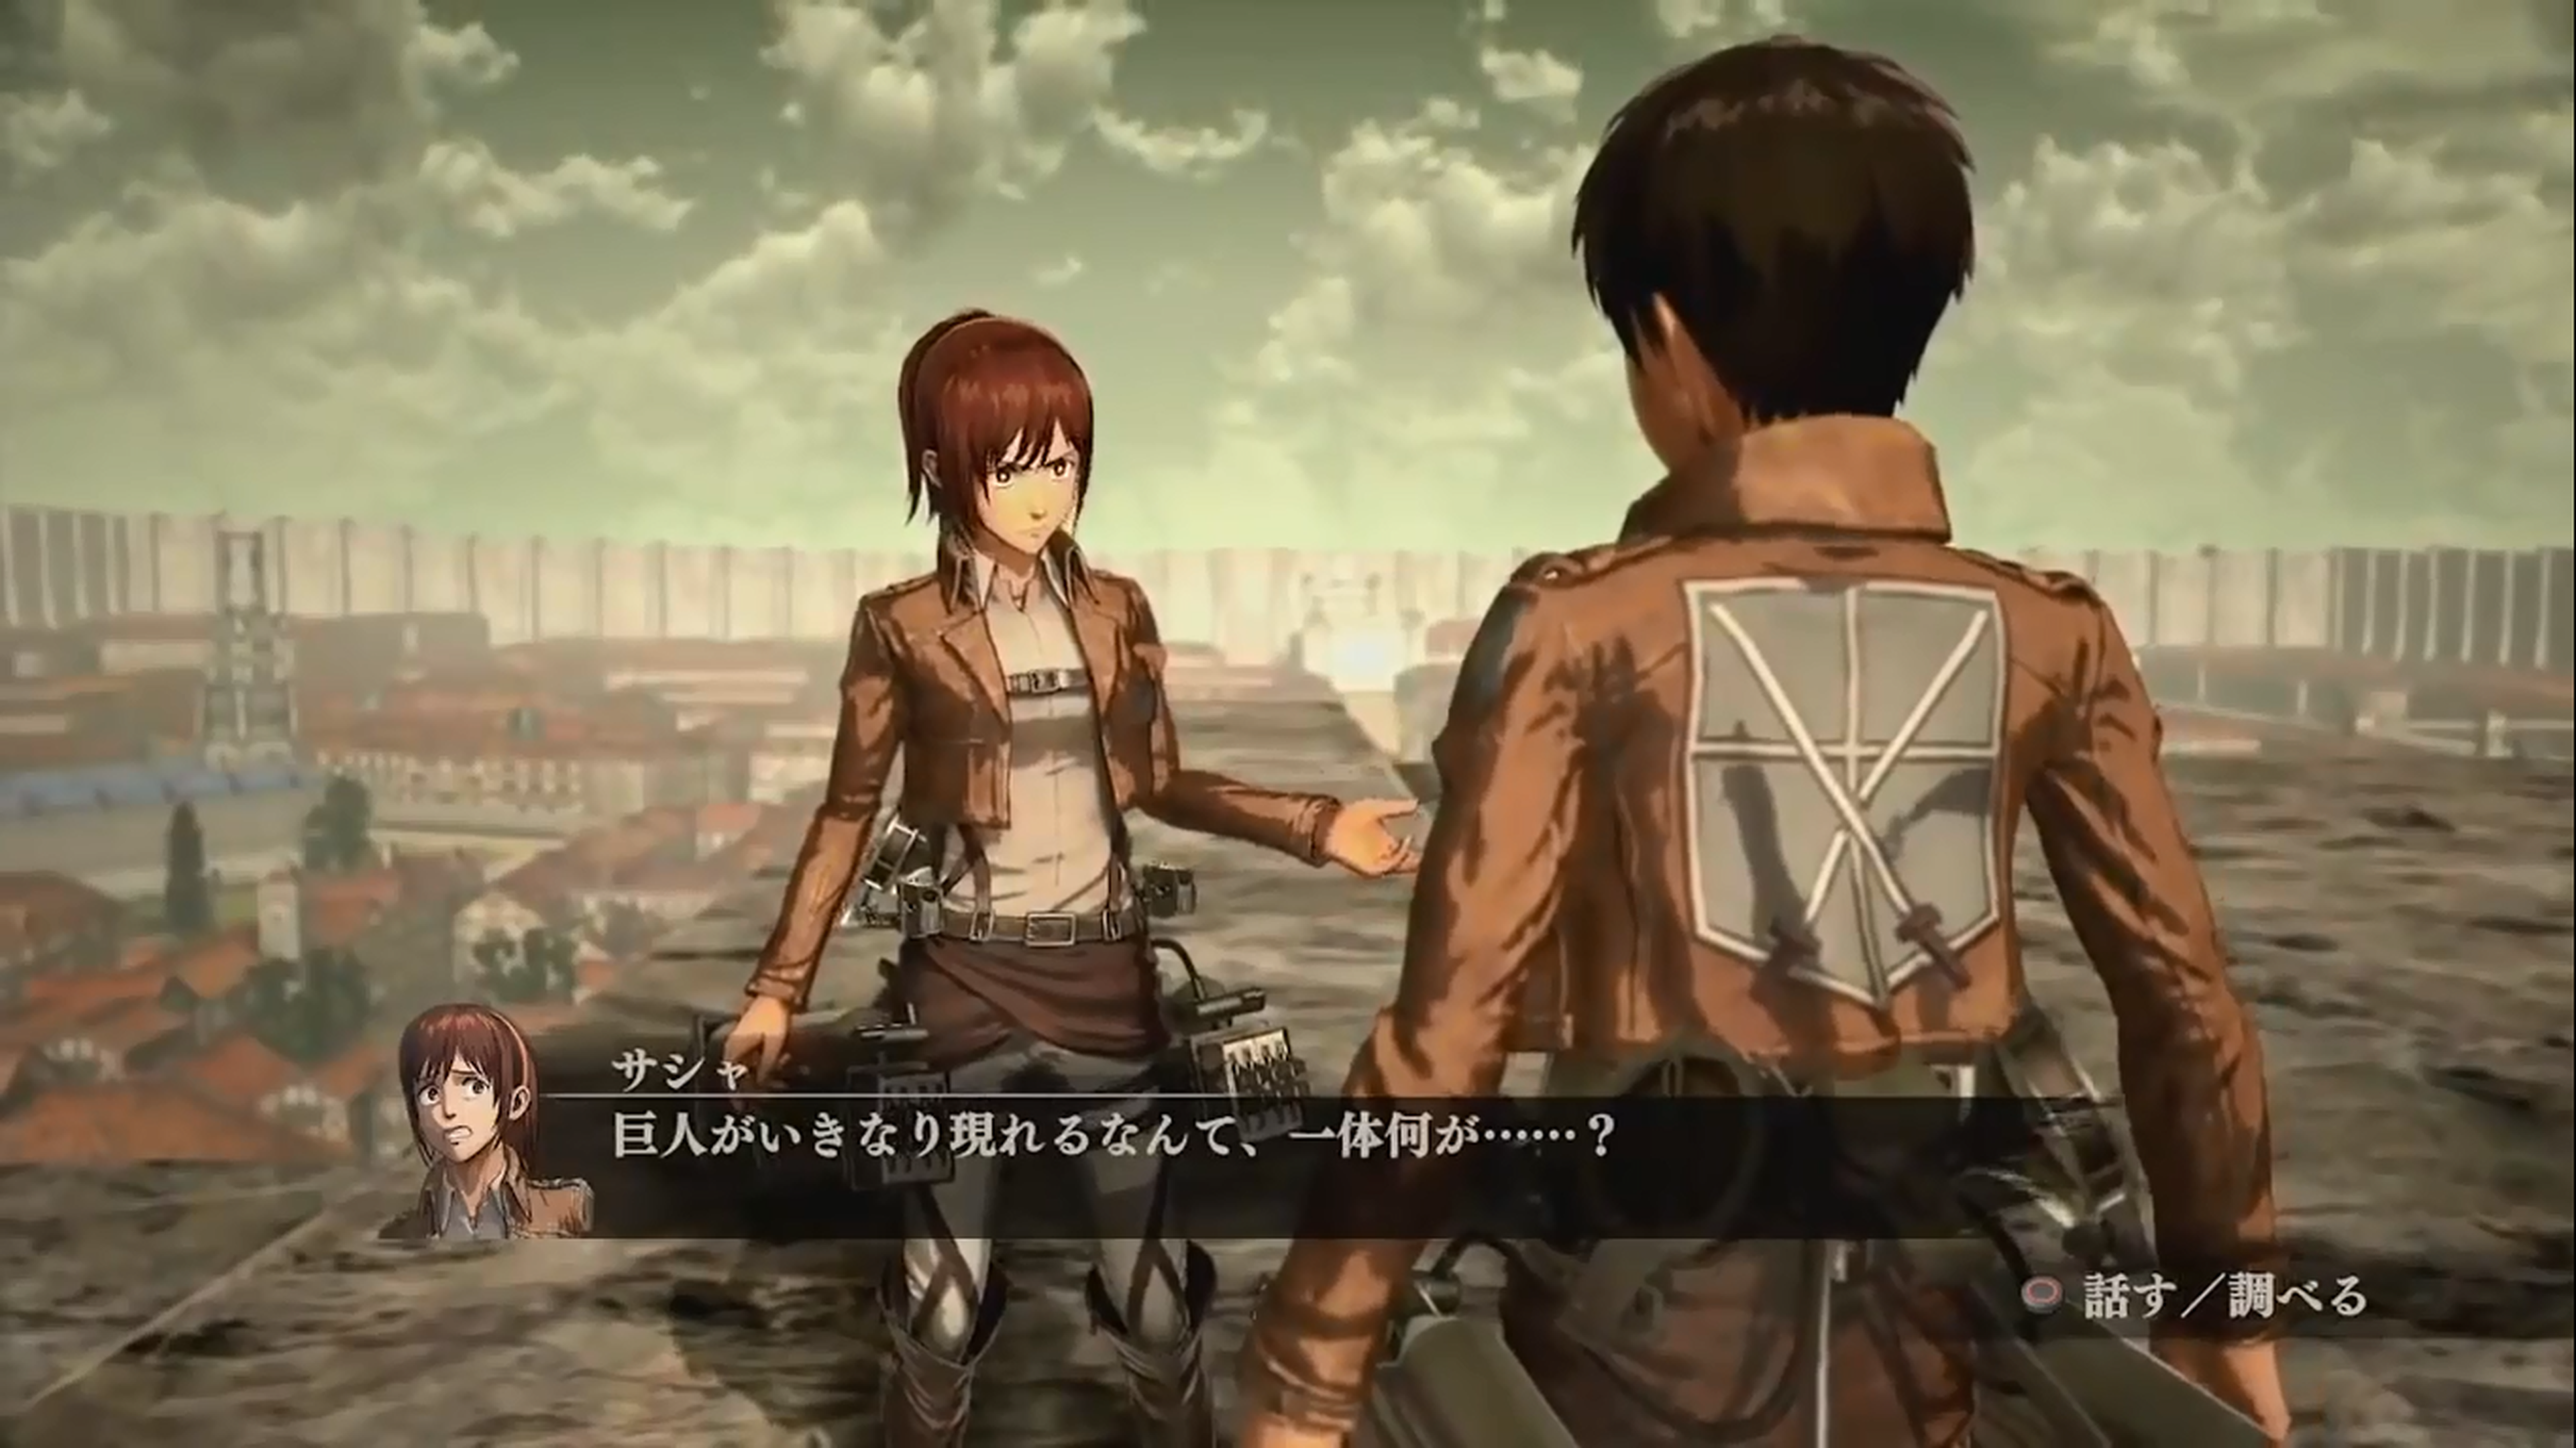 Attack on Titan 'Camp' Gameplay